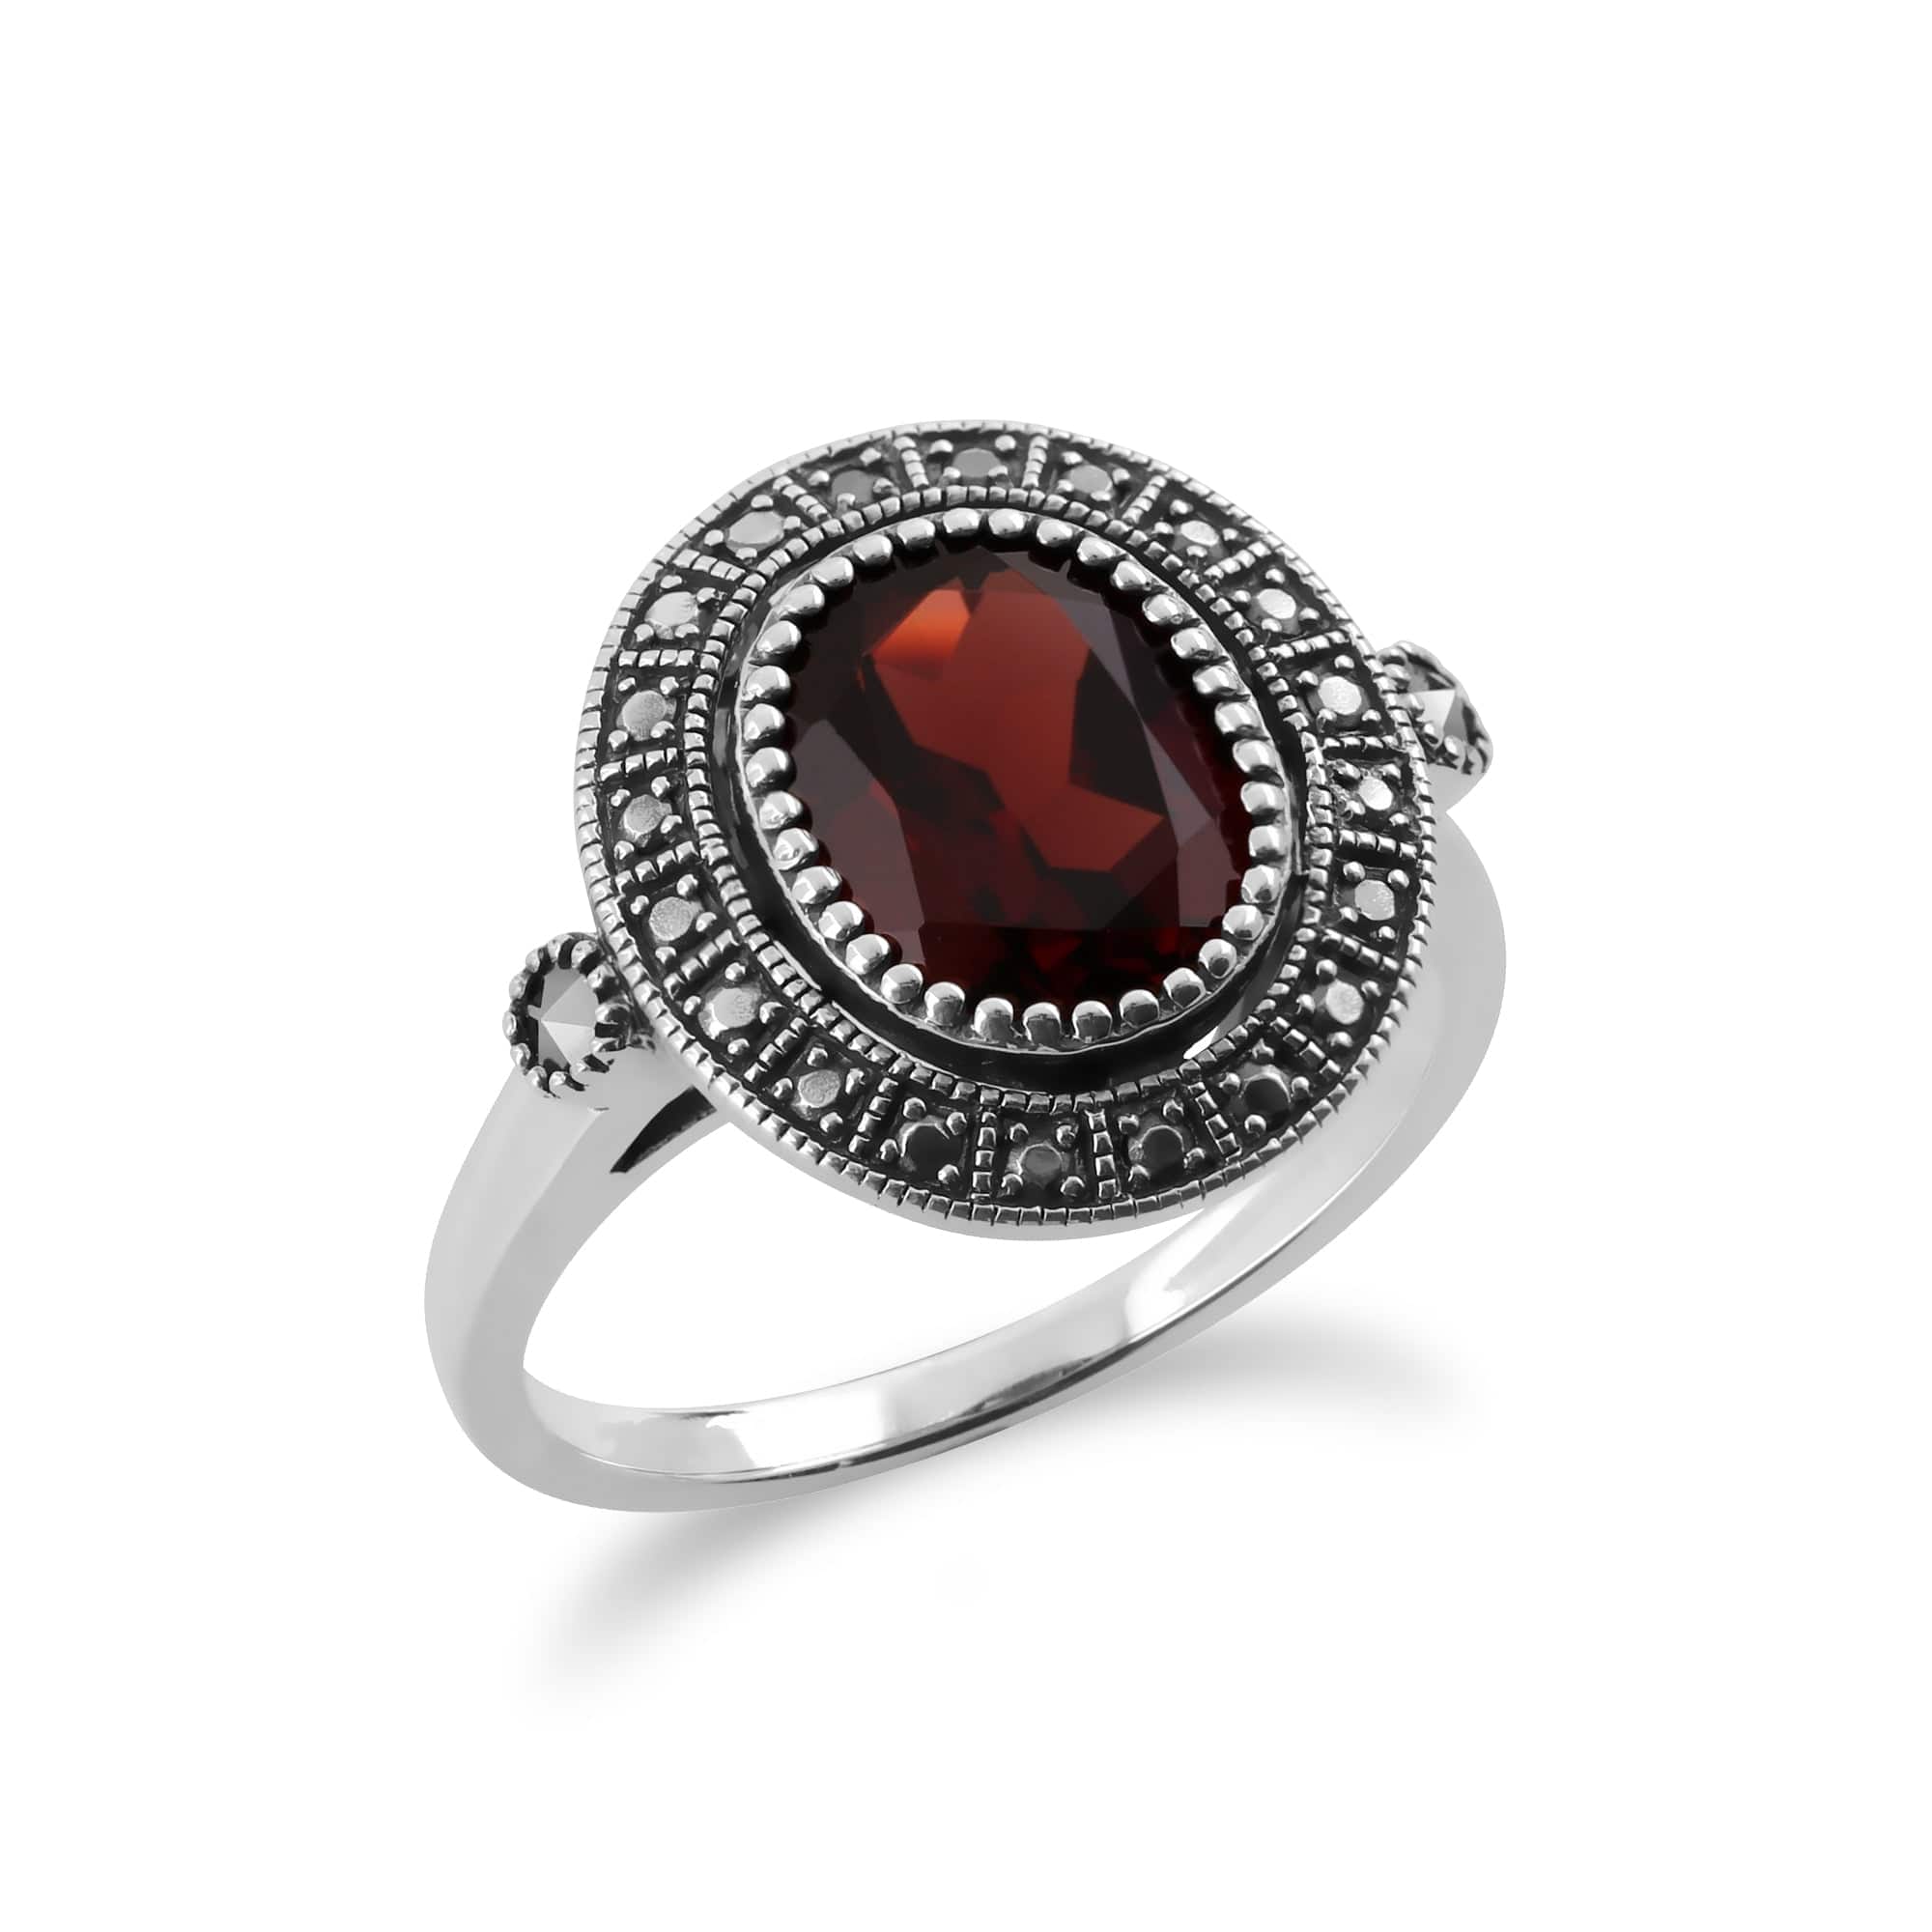 224R029502925 Art Deco Style Oval Garnet & Marcasite Statement Cocktail Ring in 925 Sterling Silver 2